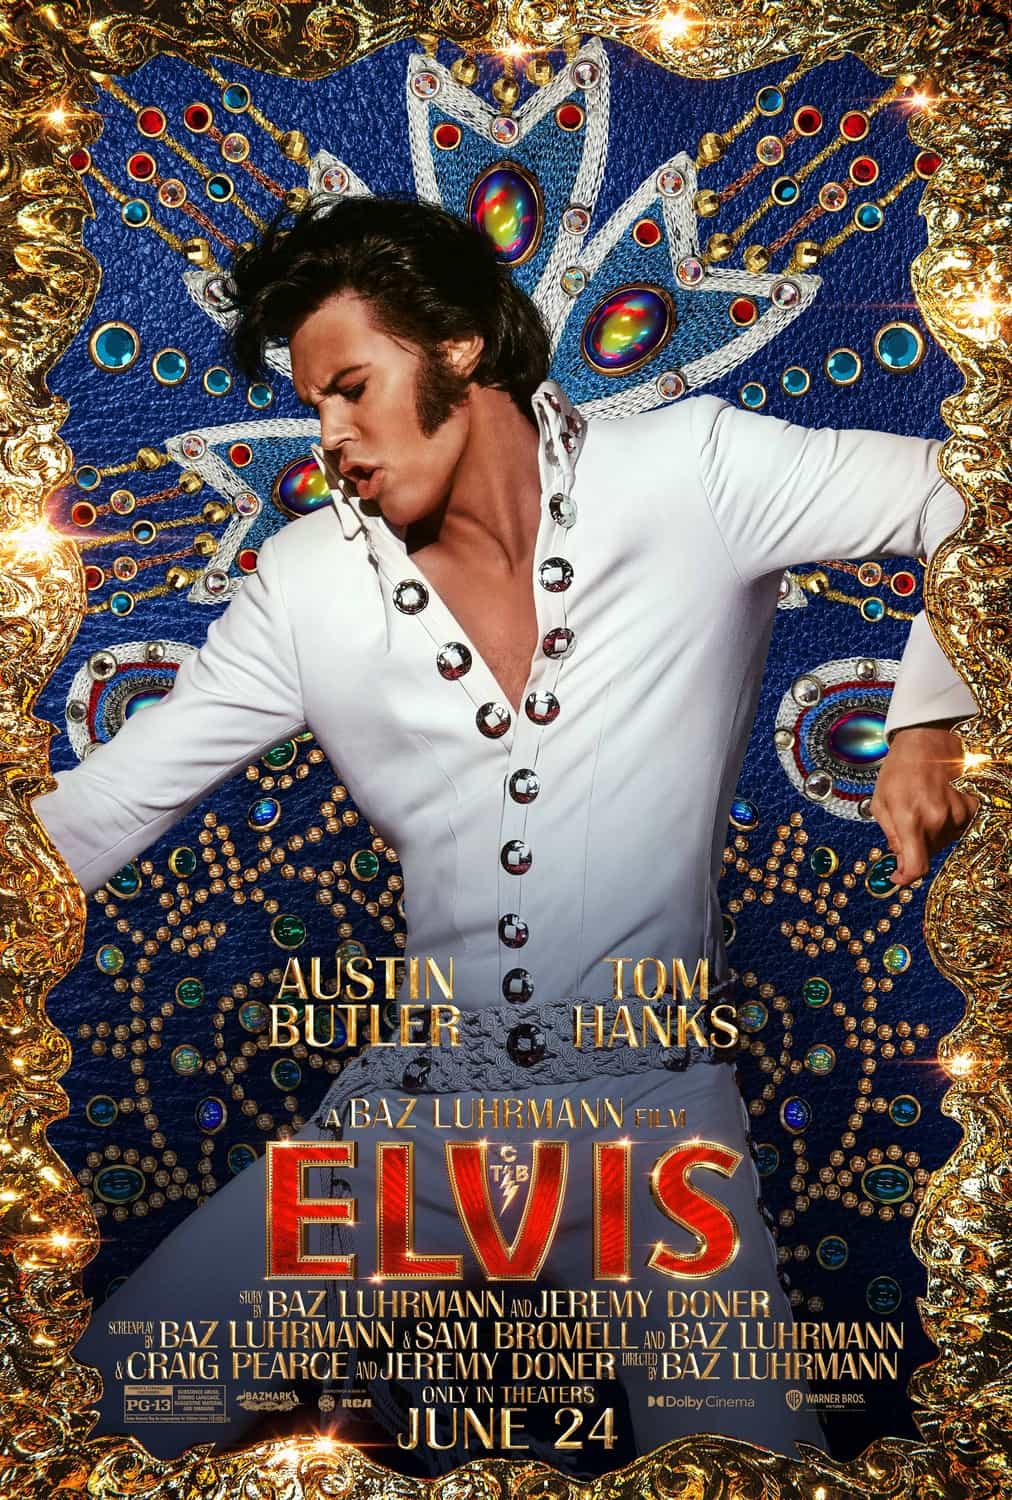 Elvis is given a 12A age rating in the UK for drug misuse, discrimination, sex references, injury detail, strong language